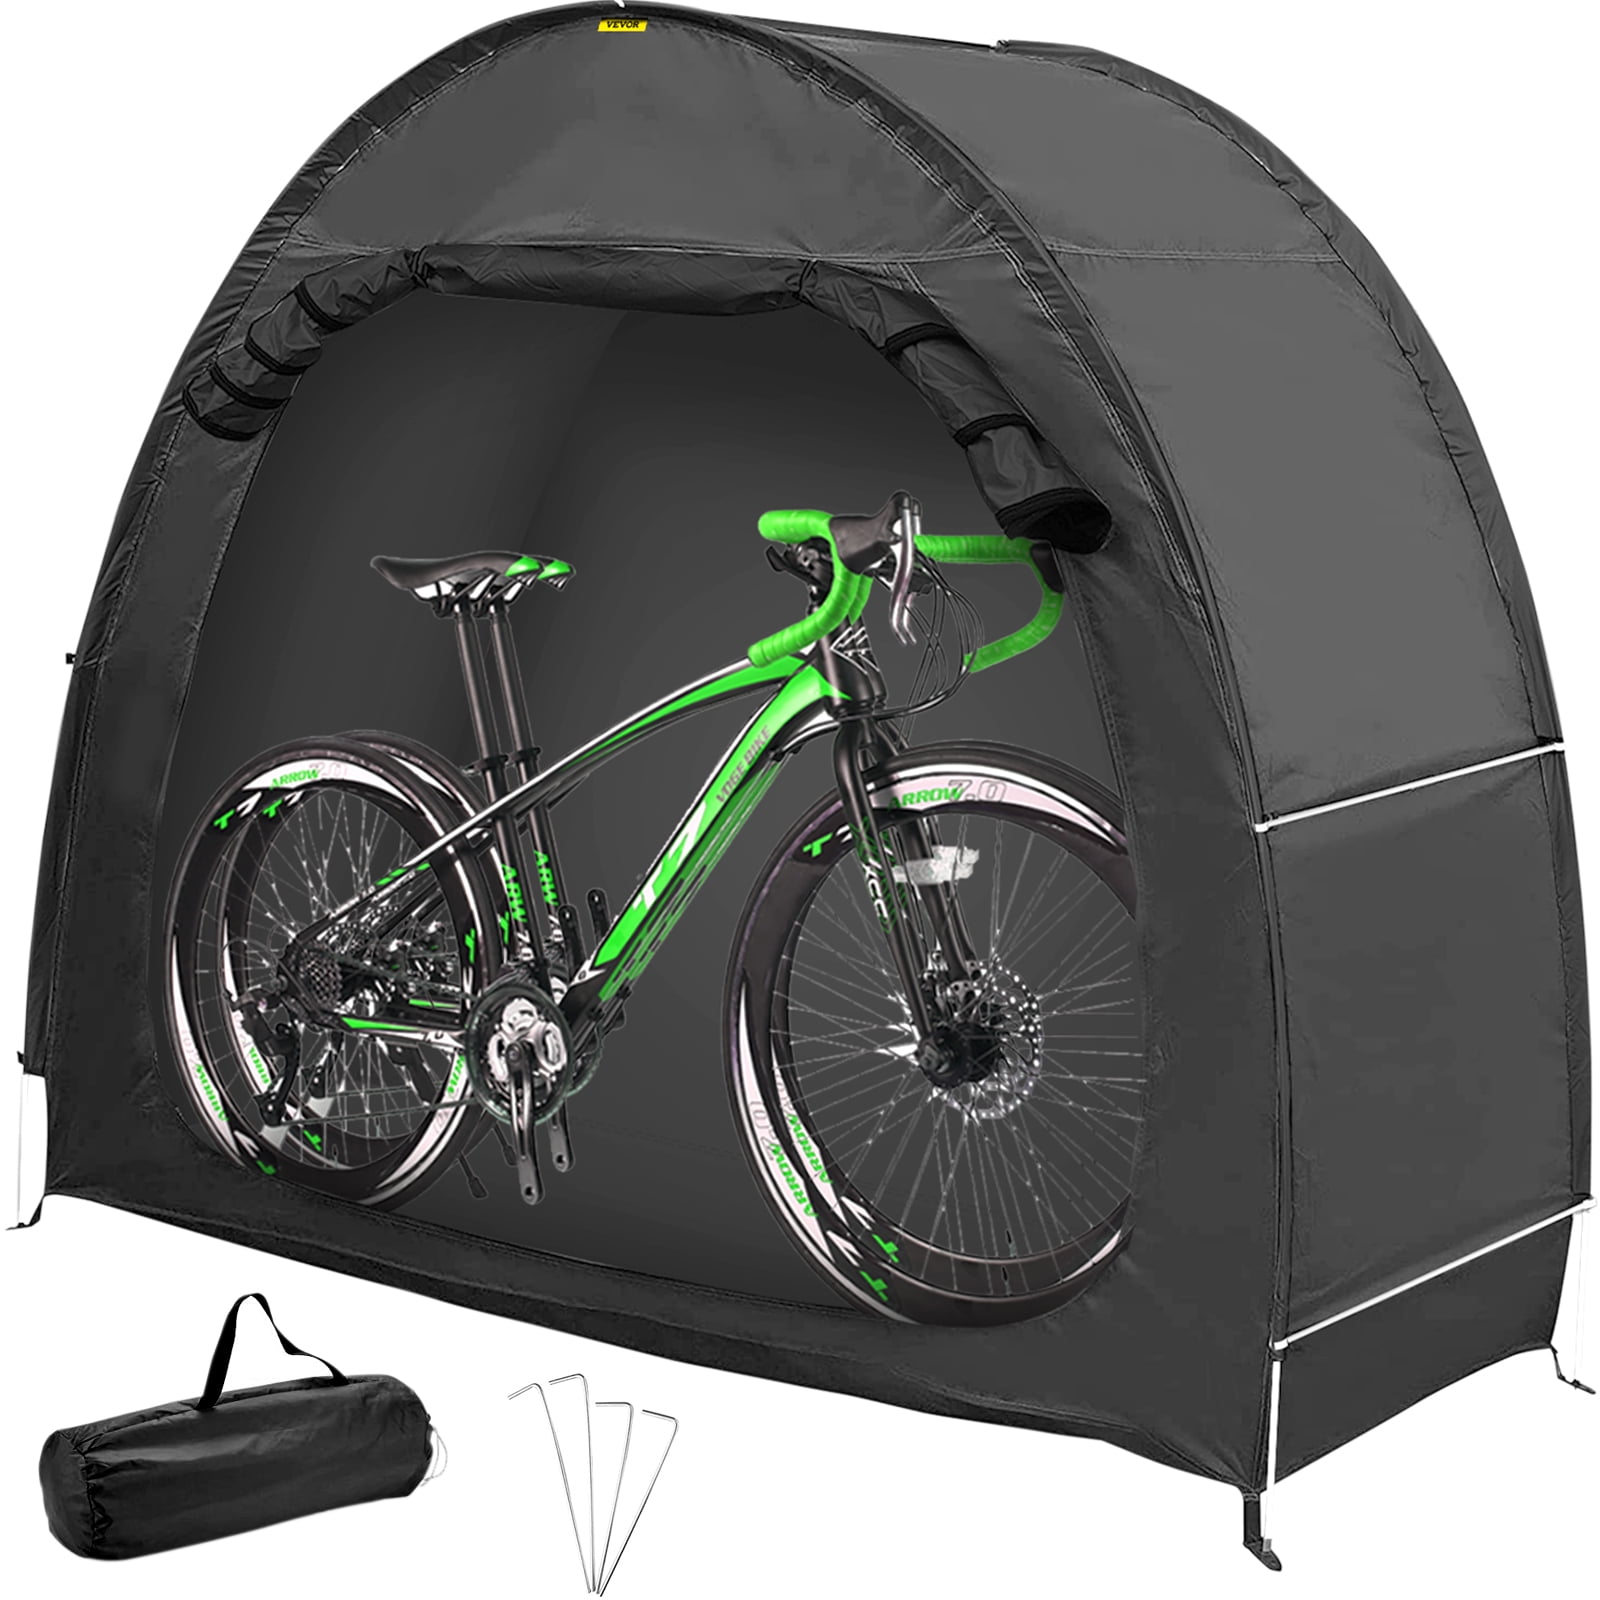 Camping. Foldable Bicycle Shelter for Outdoor Garden 210D Waterproof Silver Coated Oxford Bike Cover CALISTOUK Bike Tent Portable Outdoor Biycle Storage Shed 